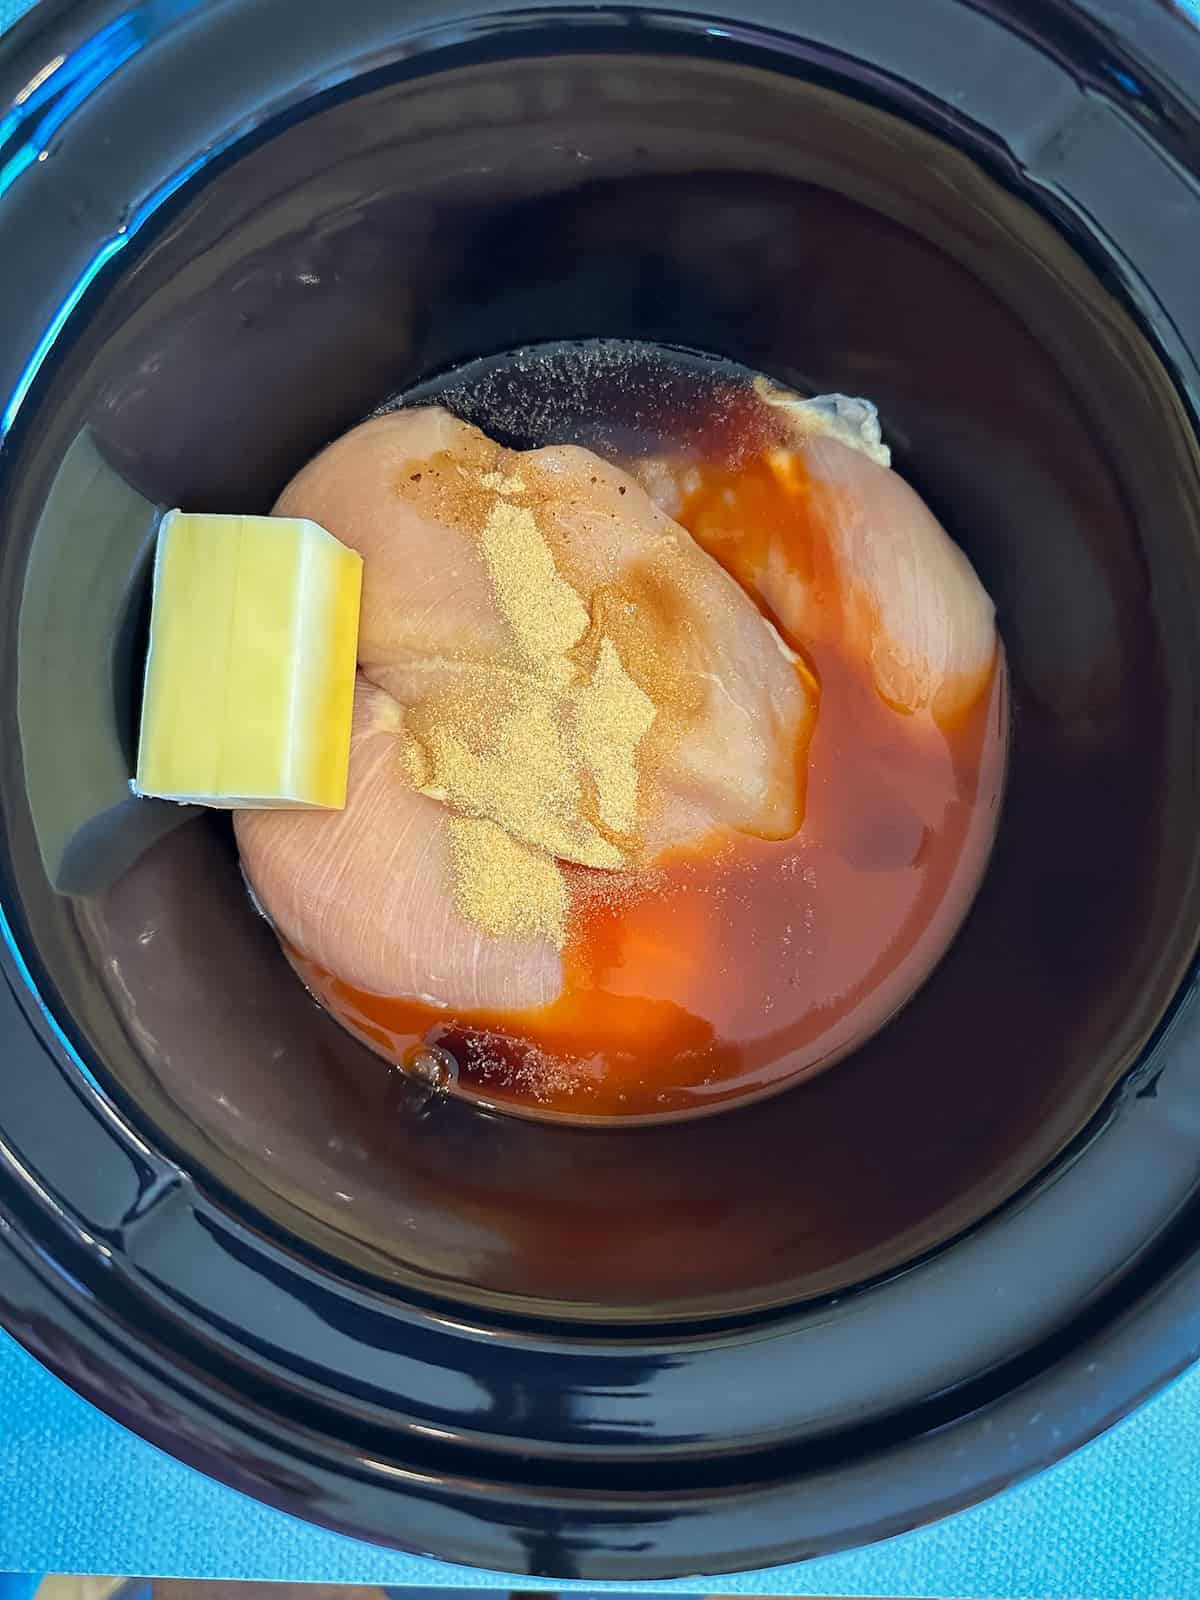 Chicken breasts with butter and hot sauce in a crockpot.